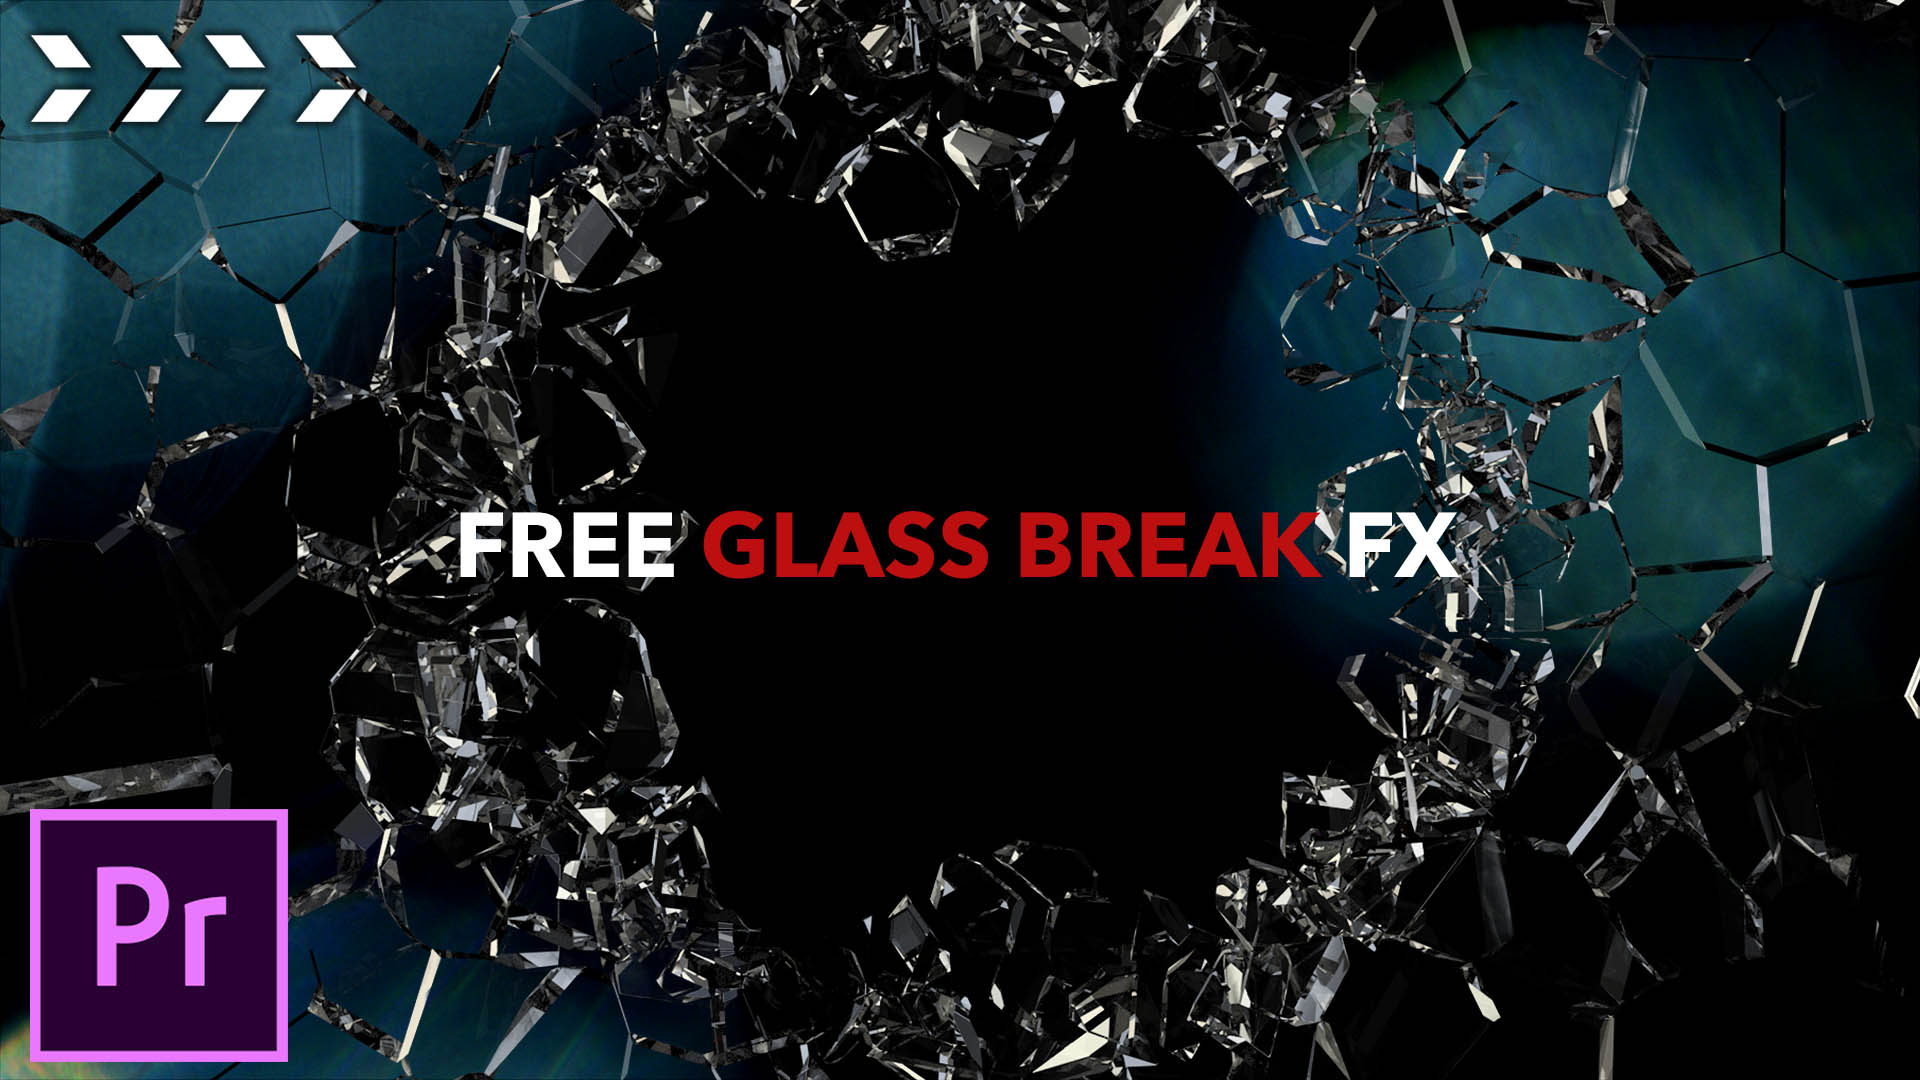 Download our Glass Break FX Sample Pack to Get FREE Adobe Premiere Effects!